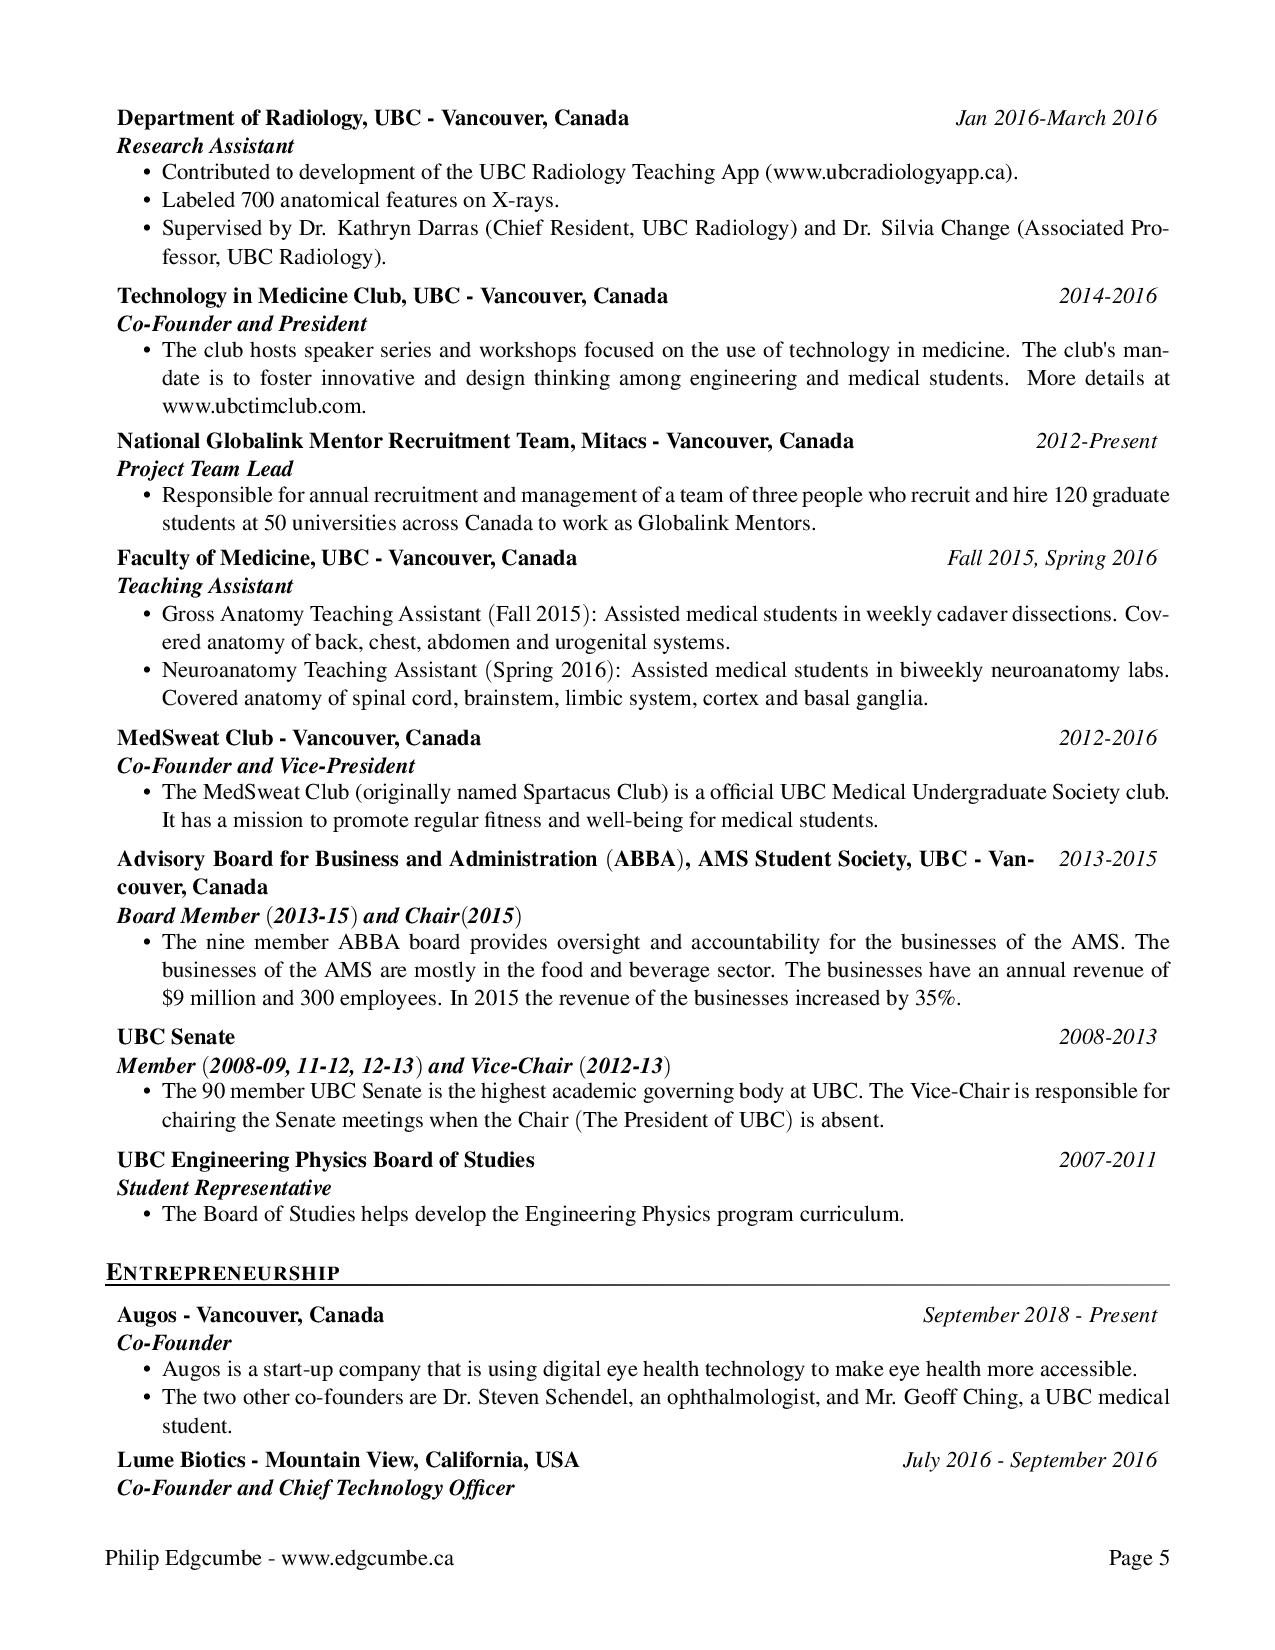 November-2020-Philip-Edgcumbe-Resume-8-pages-page-005